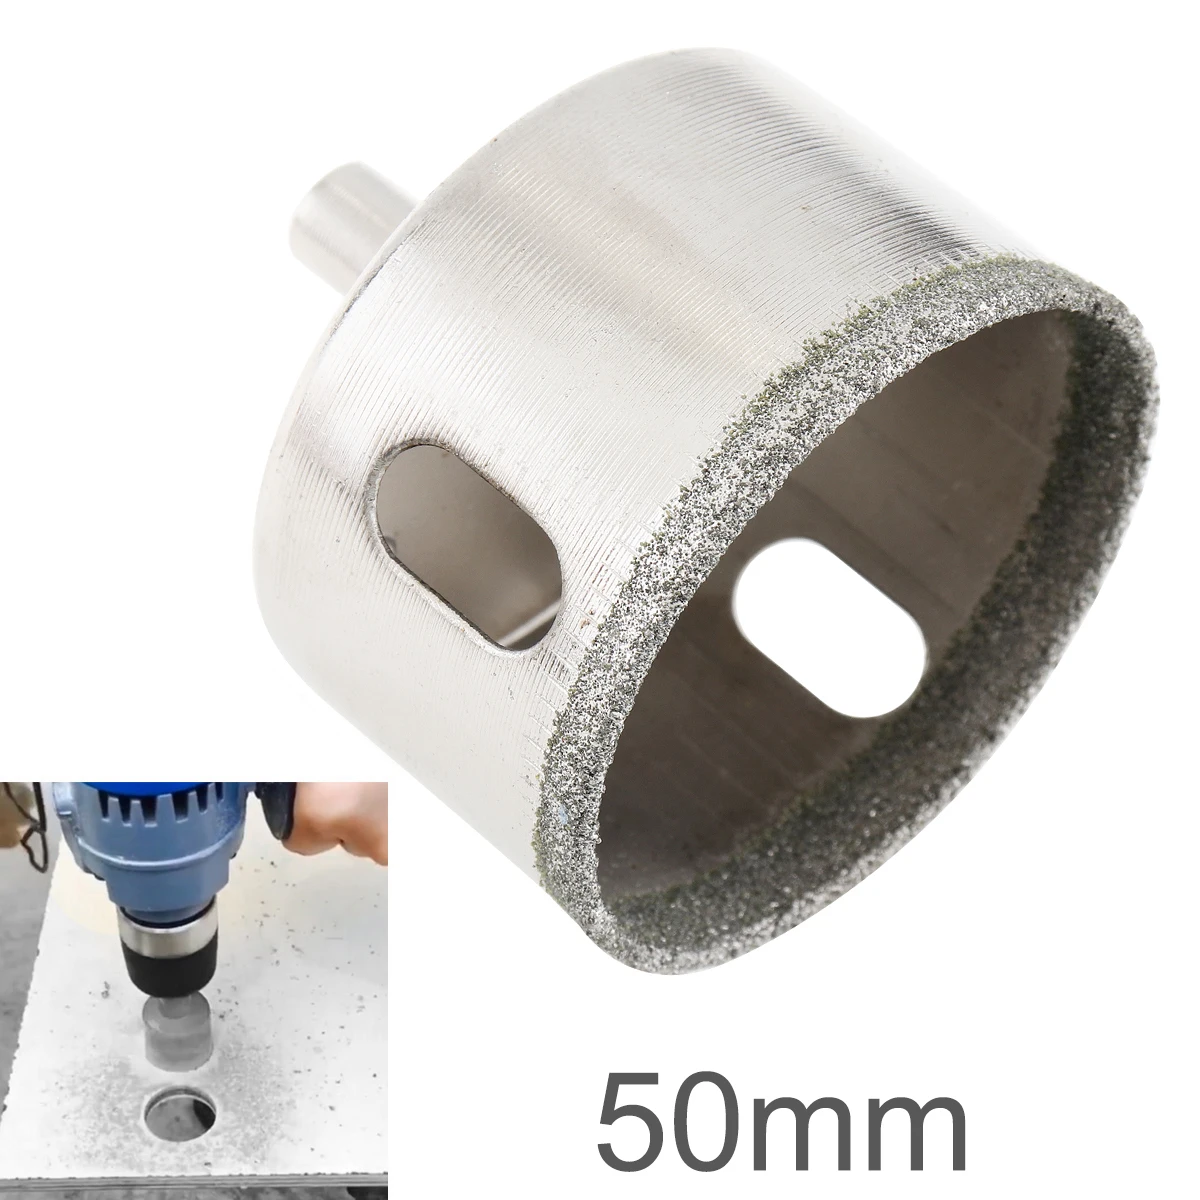 

50mm Diamond Coated Core Hole Saw Drill Bit Kit Tools Glass Drill Hole Opener for Tiles Glass Ceramic